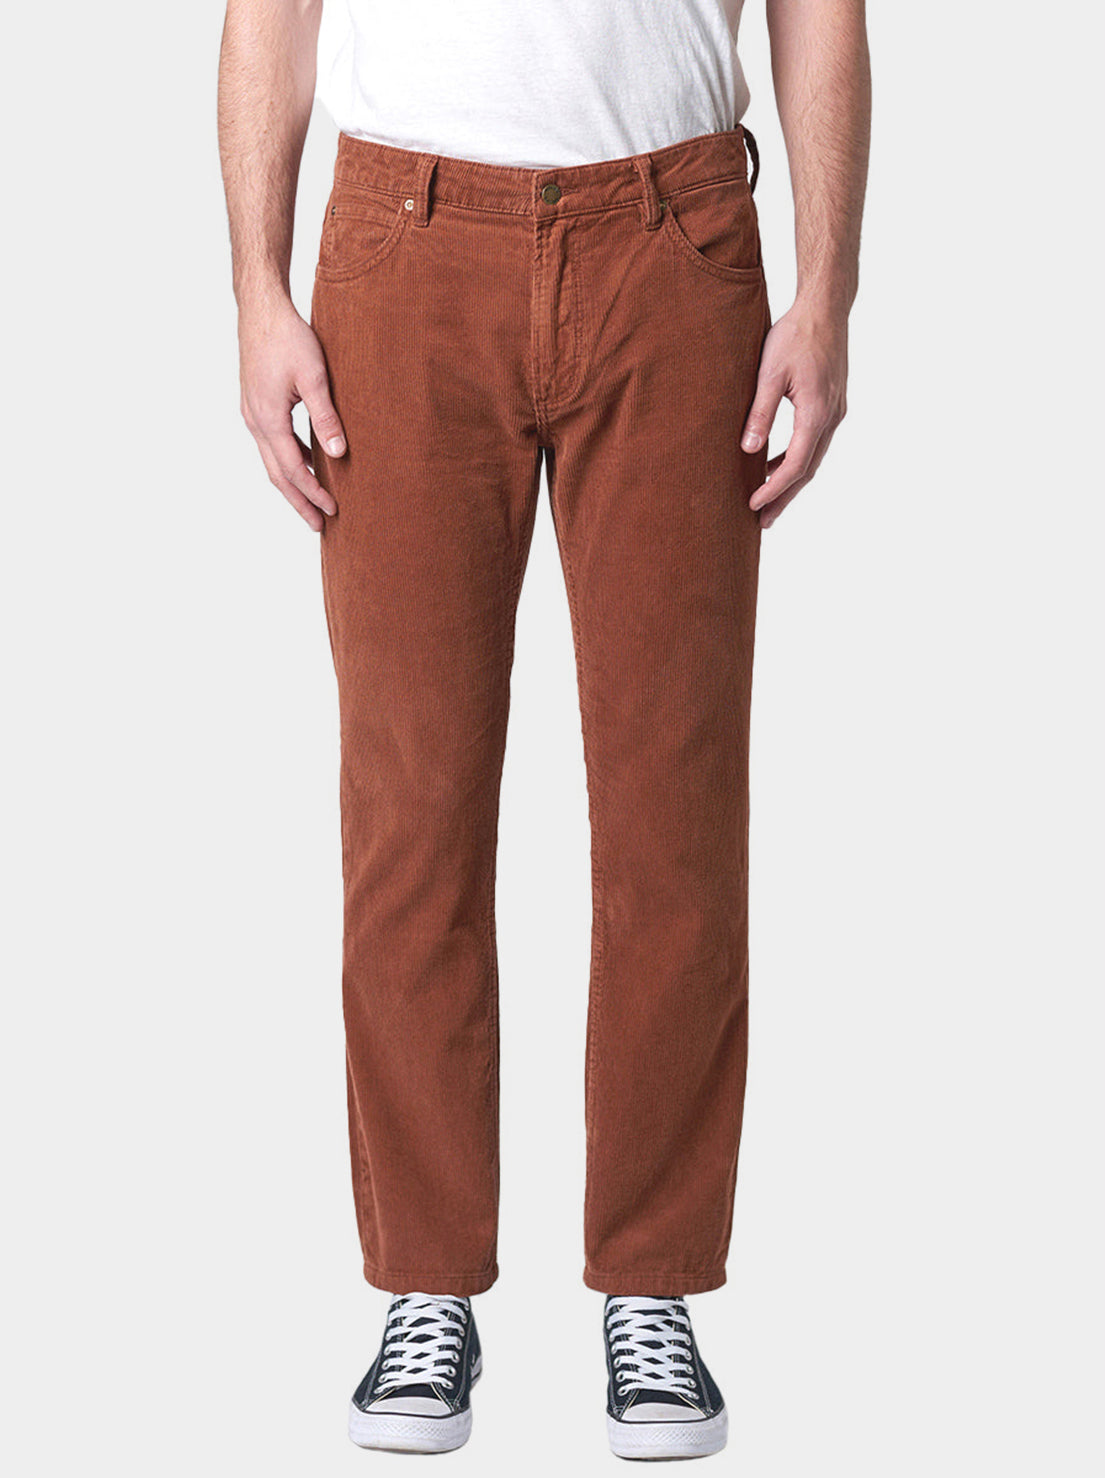 Rolla's - Relaxo Cord Pant - Rust Cord